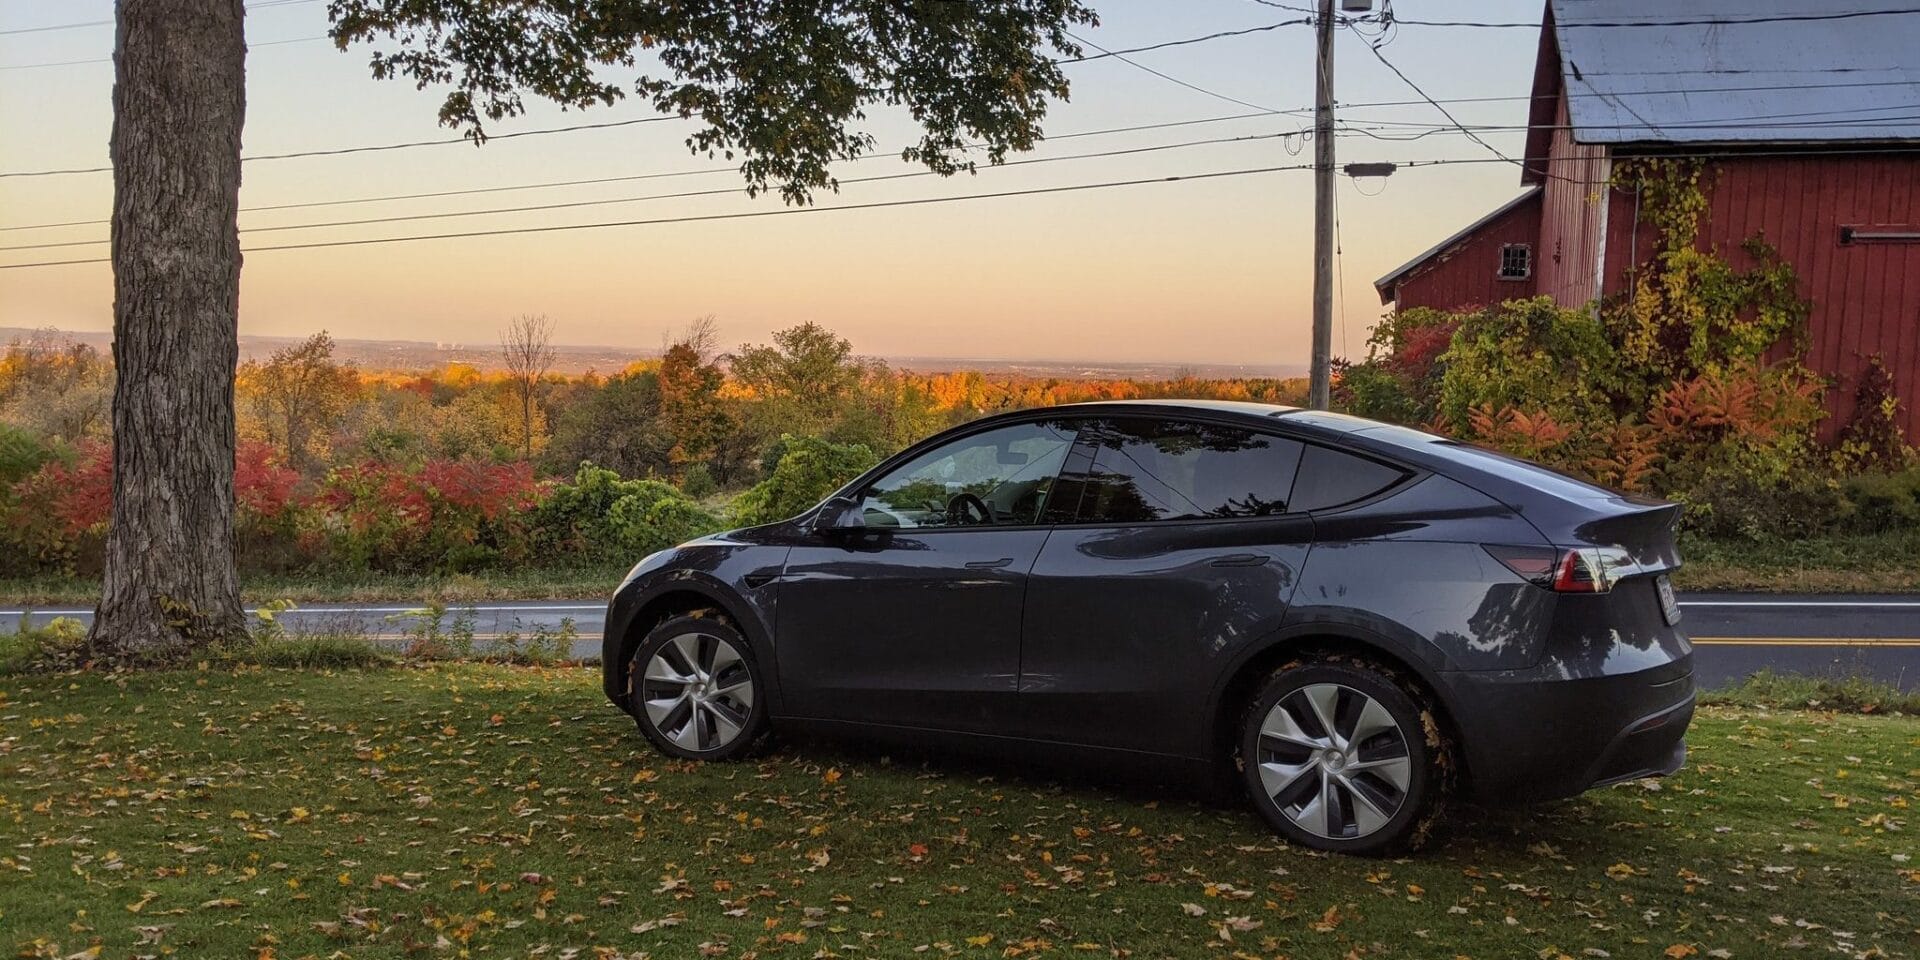 The 272 mpg(e)* Tesla Model Y – driving on really clean electricity in New York